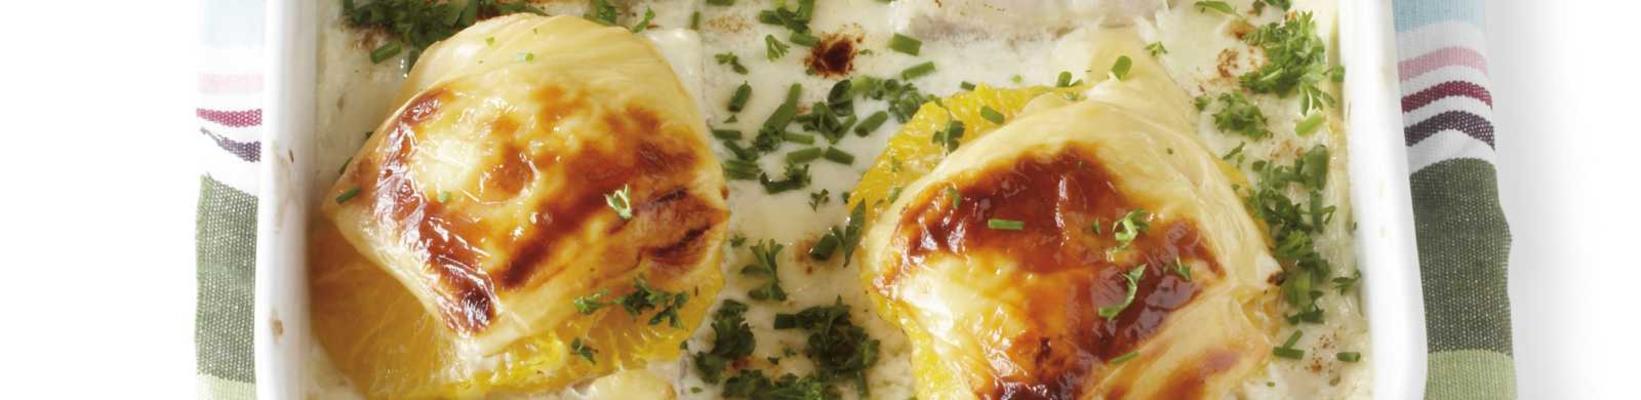 fish from the oven with orange and cheese